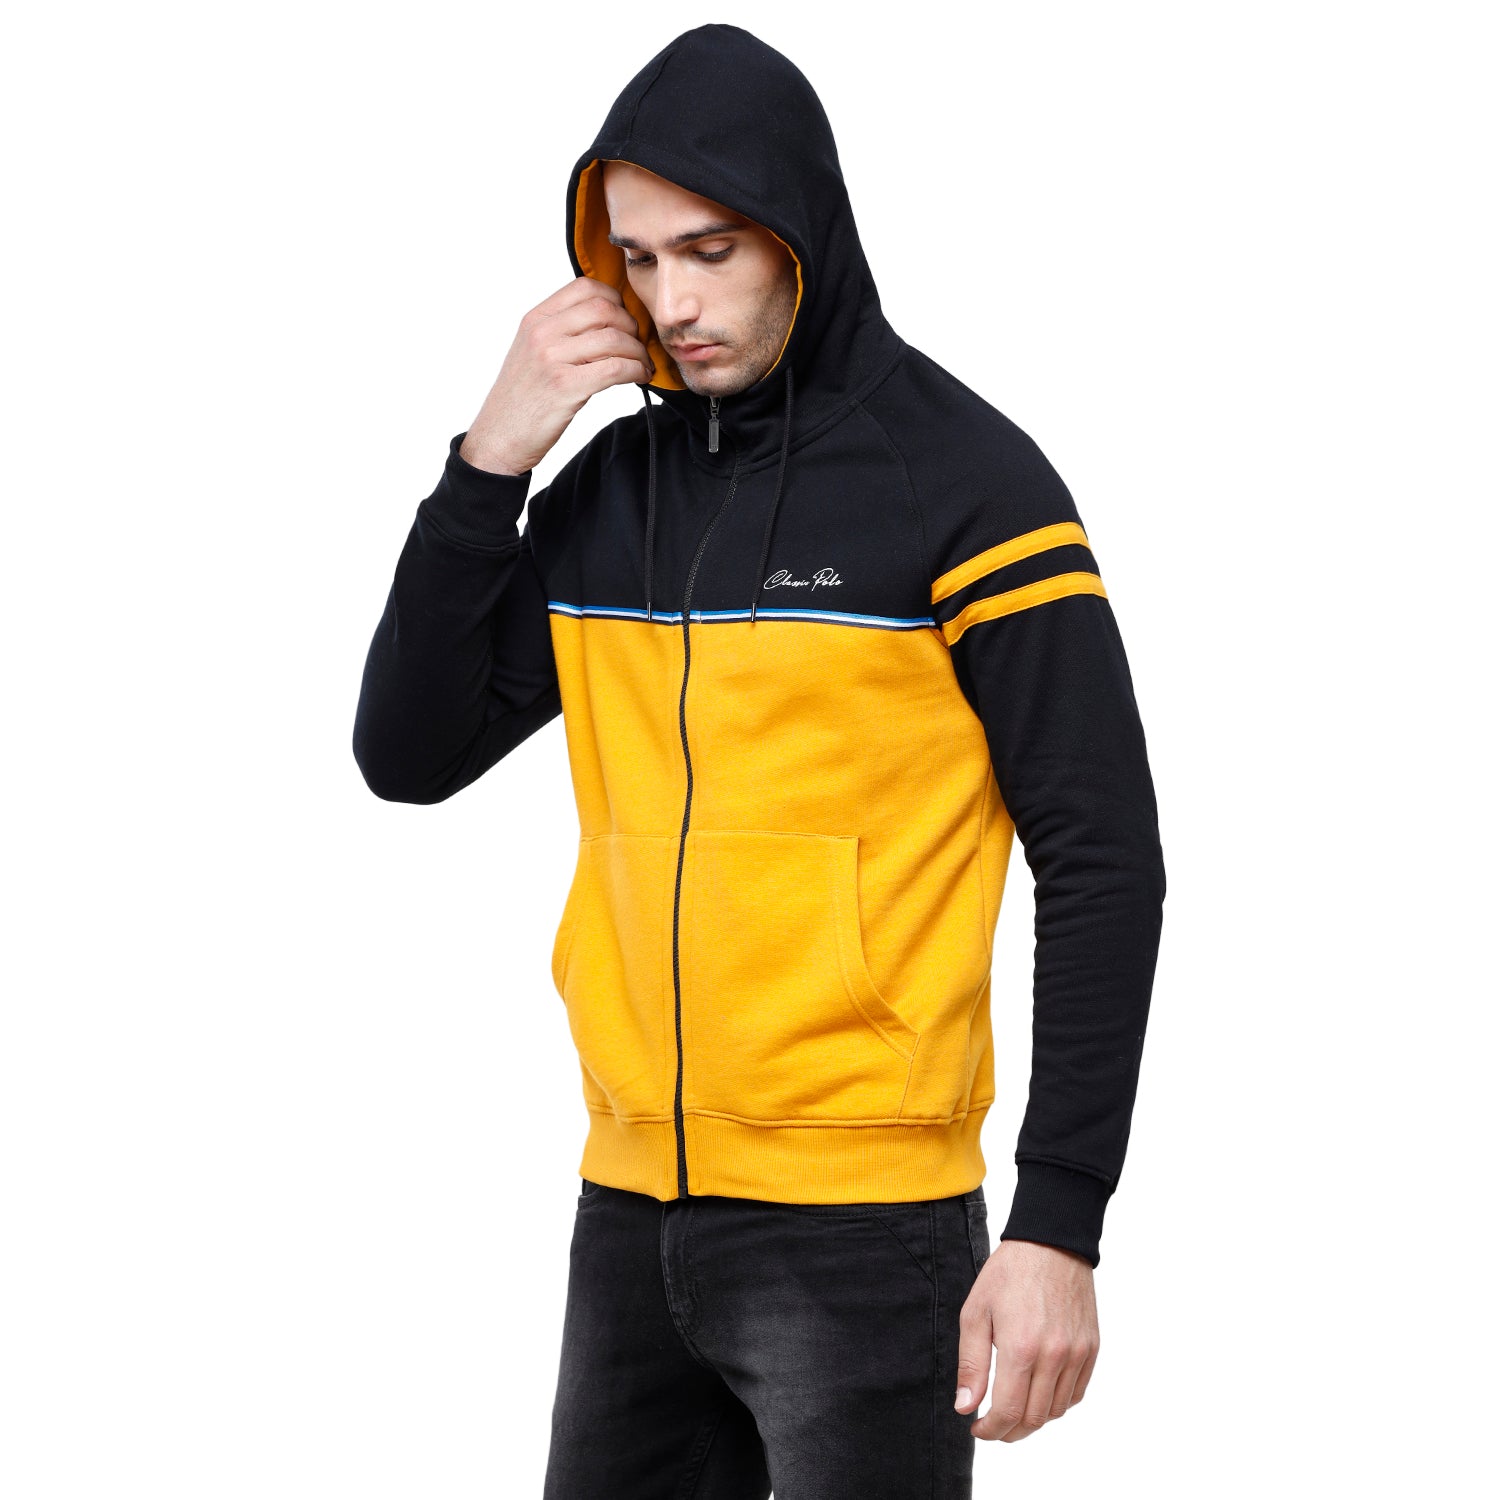 Classic Polo Men's Color Block Full Sleeve Yellow & Black Hood Sweat Shirt - CPSS-330A Sweat Shirts Classic Polo 